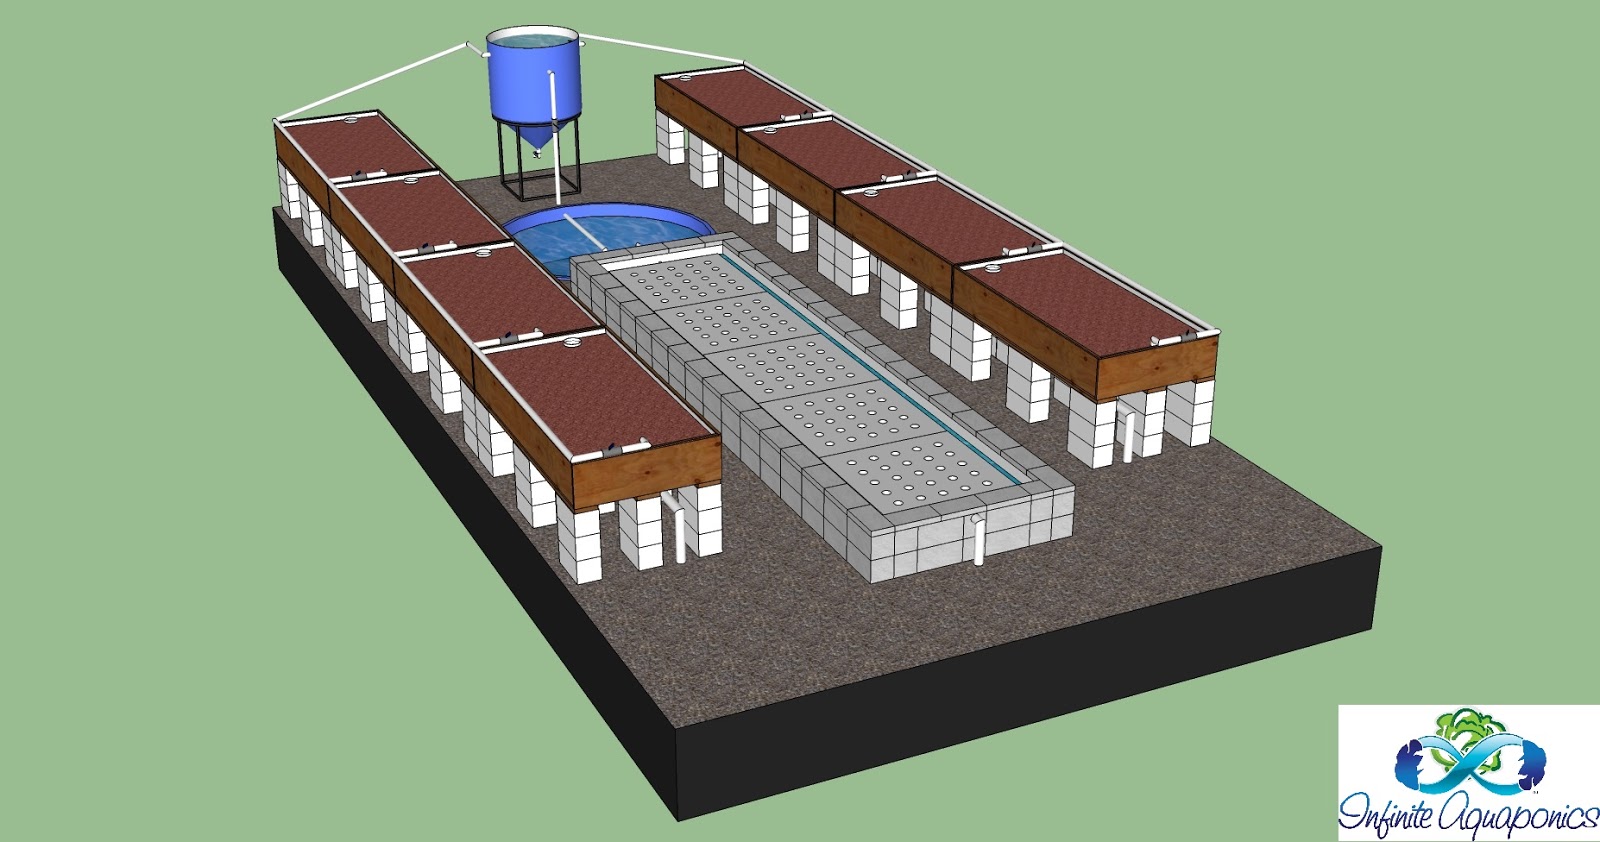 ... : Friday SketchUp Archive [Starter Commercial Aquaponics System